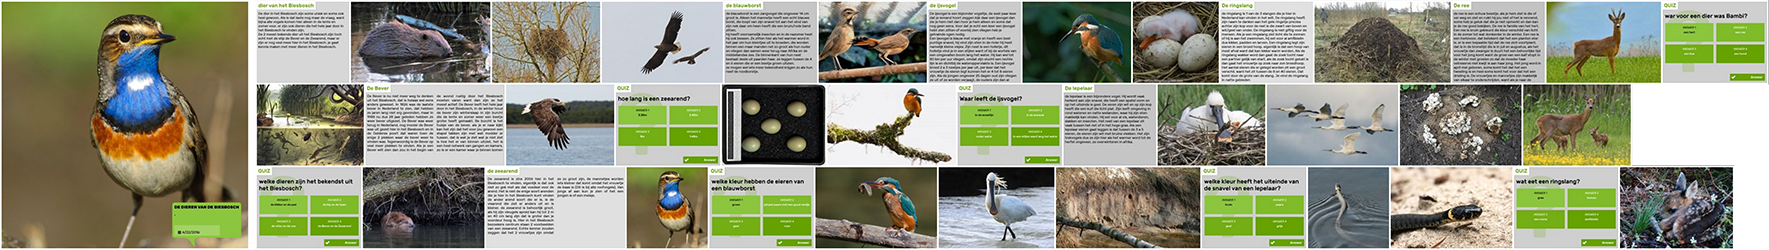 Staatsbosbeheer (Dutch Forestry Commission) uses Local Stories